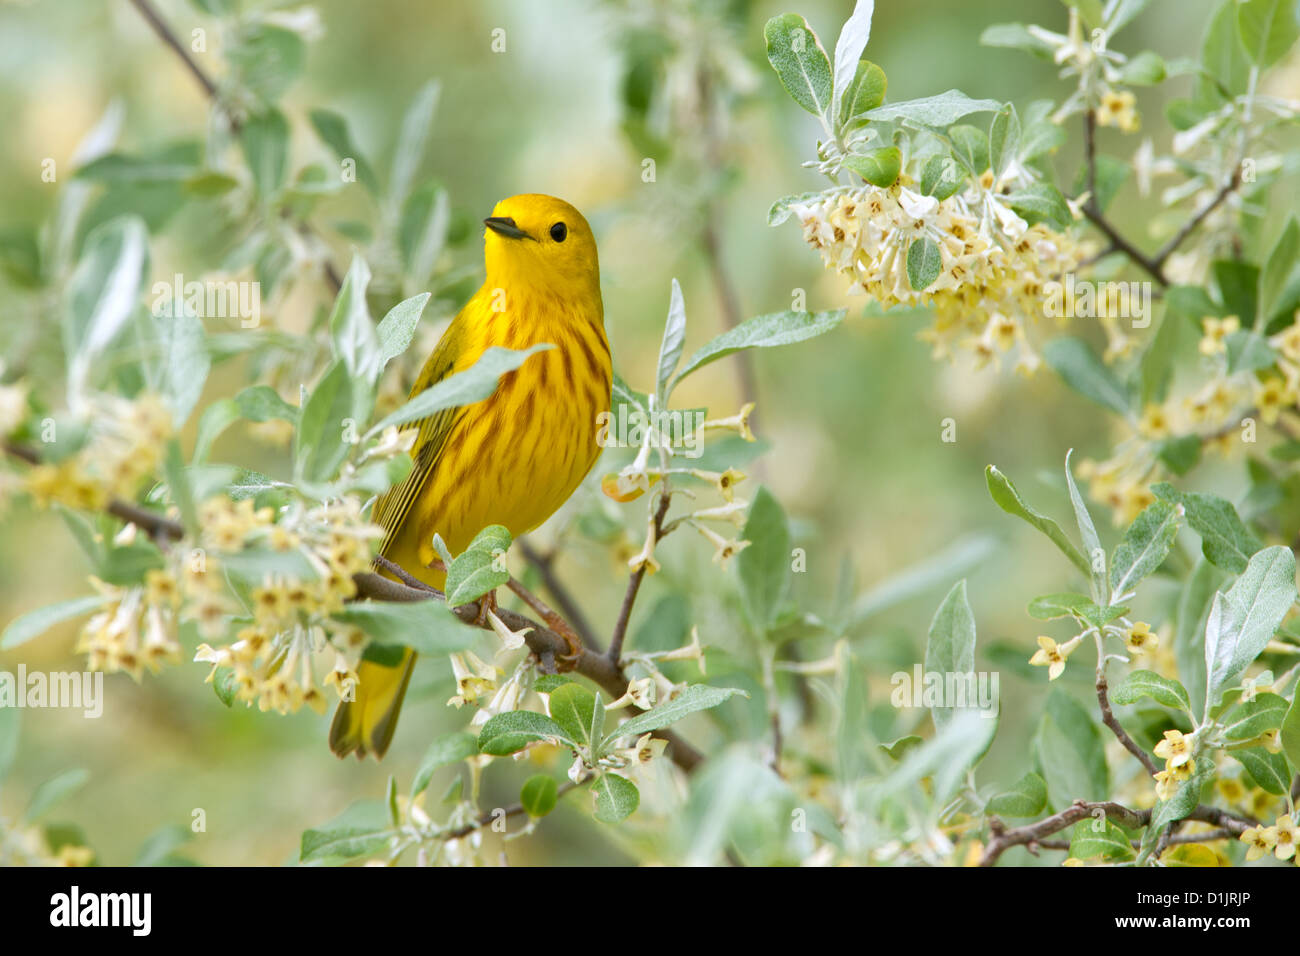 Yellow Warbler perched in Olive Tree birds bird songbird songbirds Ornithology Science Nature Wildlife Environment warblers Stock Photo